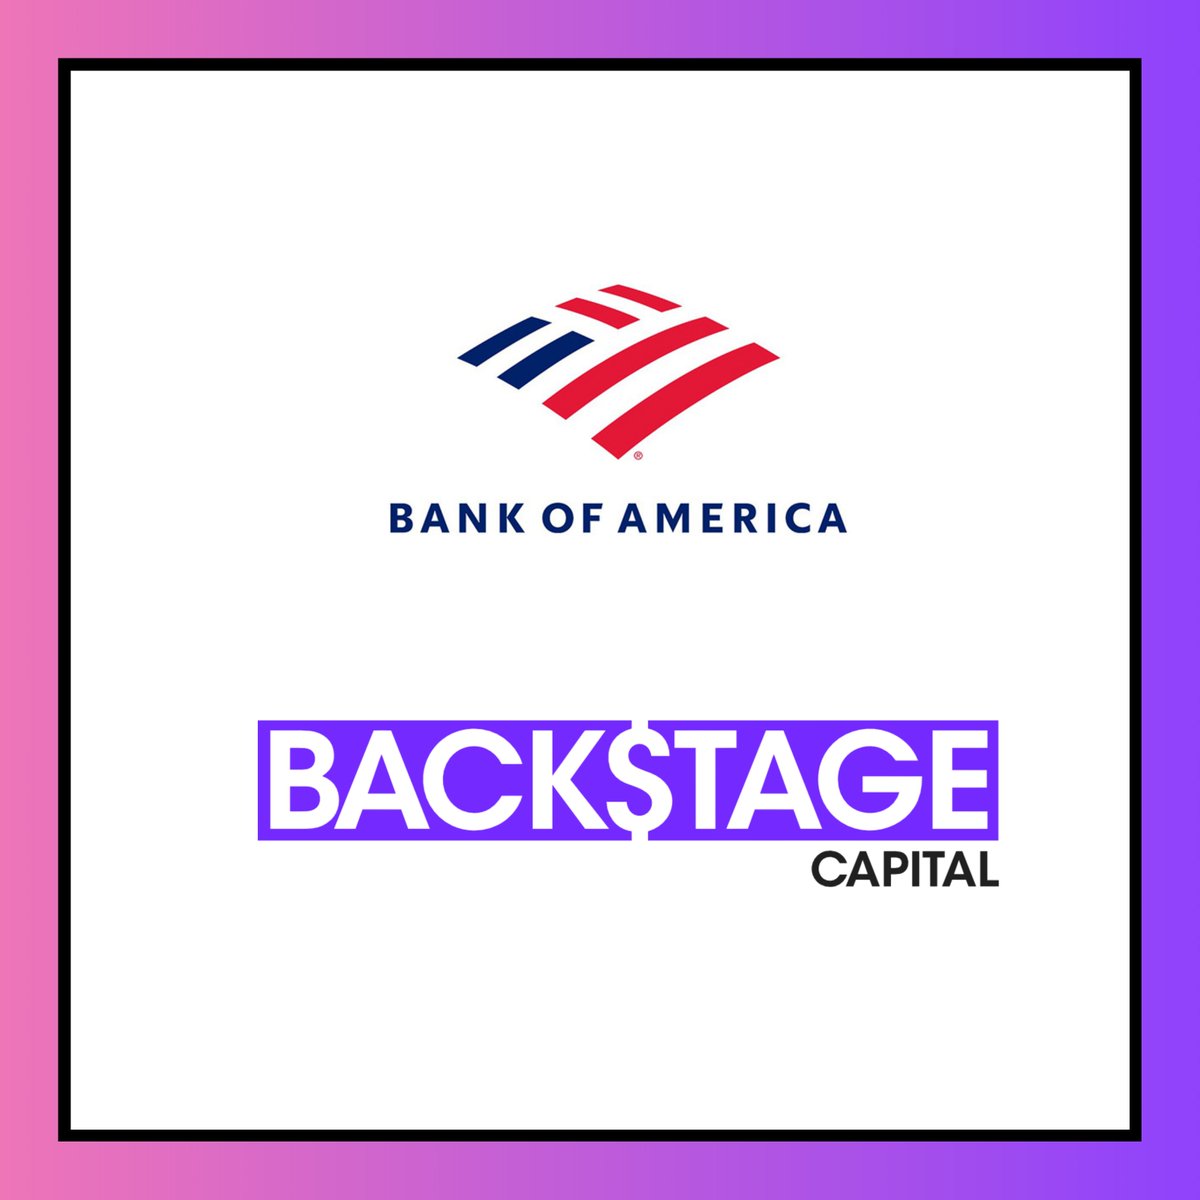 BIG NEWS‼️ 'We are thrilled that @BankofAmerica is a core investor in our newest, largest fund.' @ArlanWasHere buff.ly/3paRaRZ